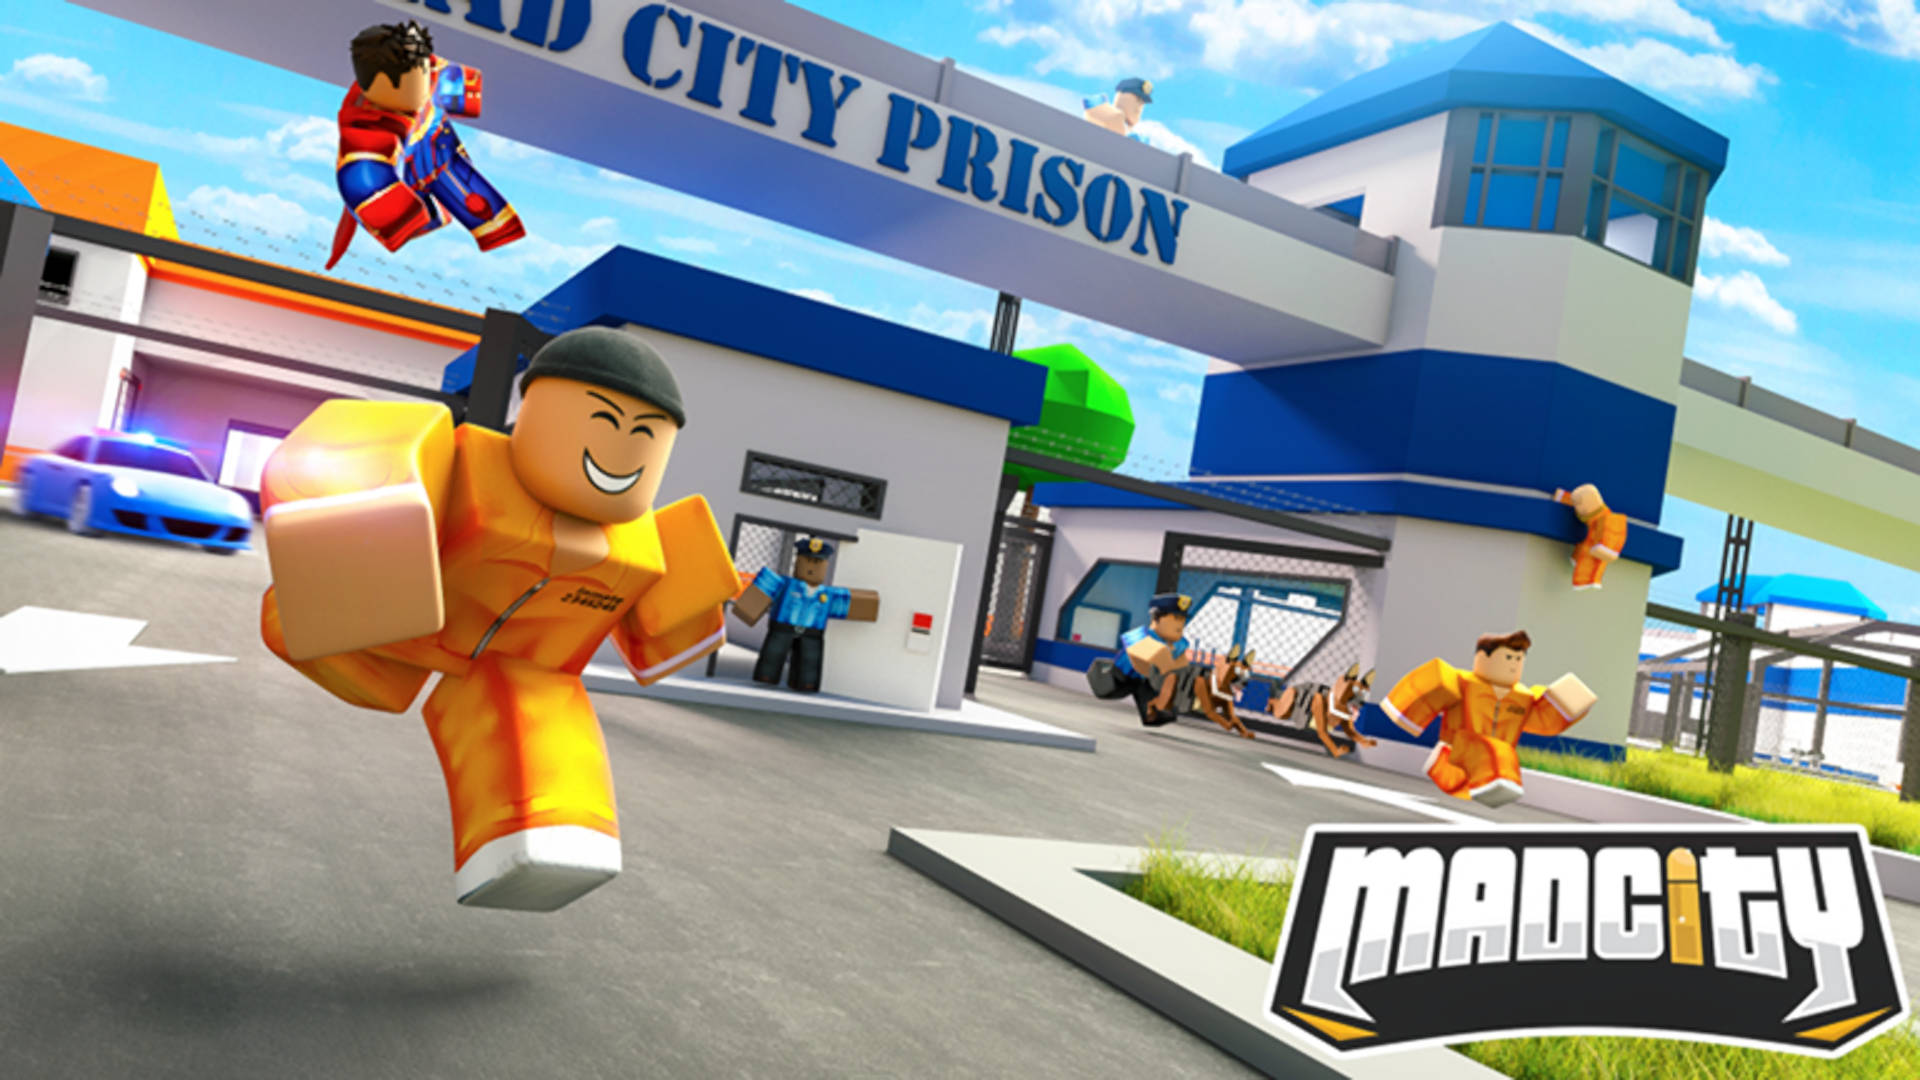 Criminals running from City Prison as they are chased by superheroes and police